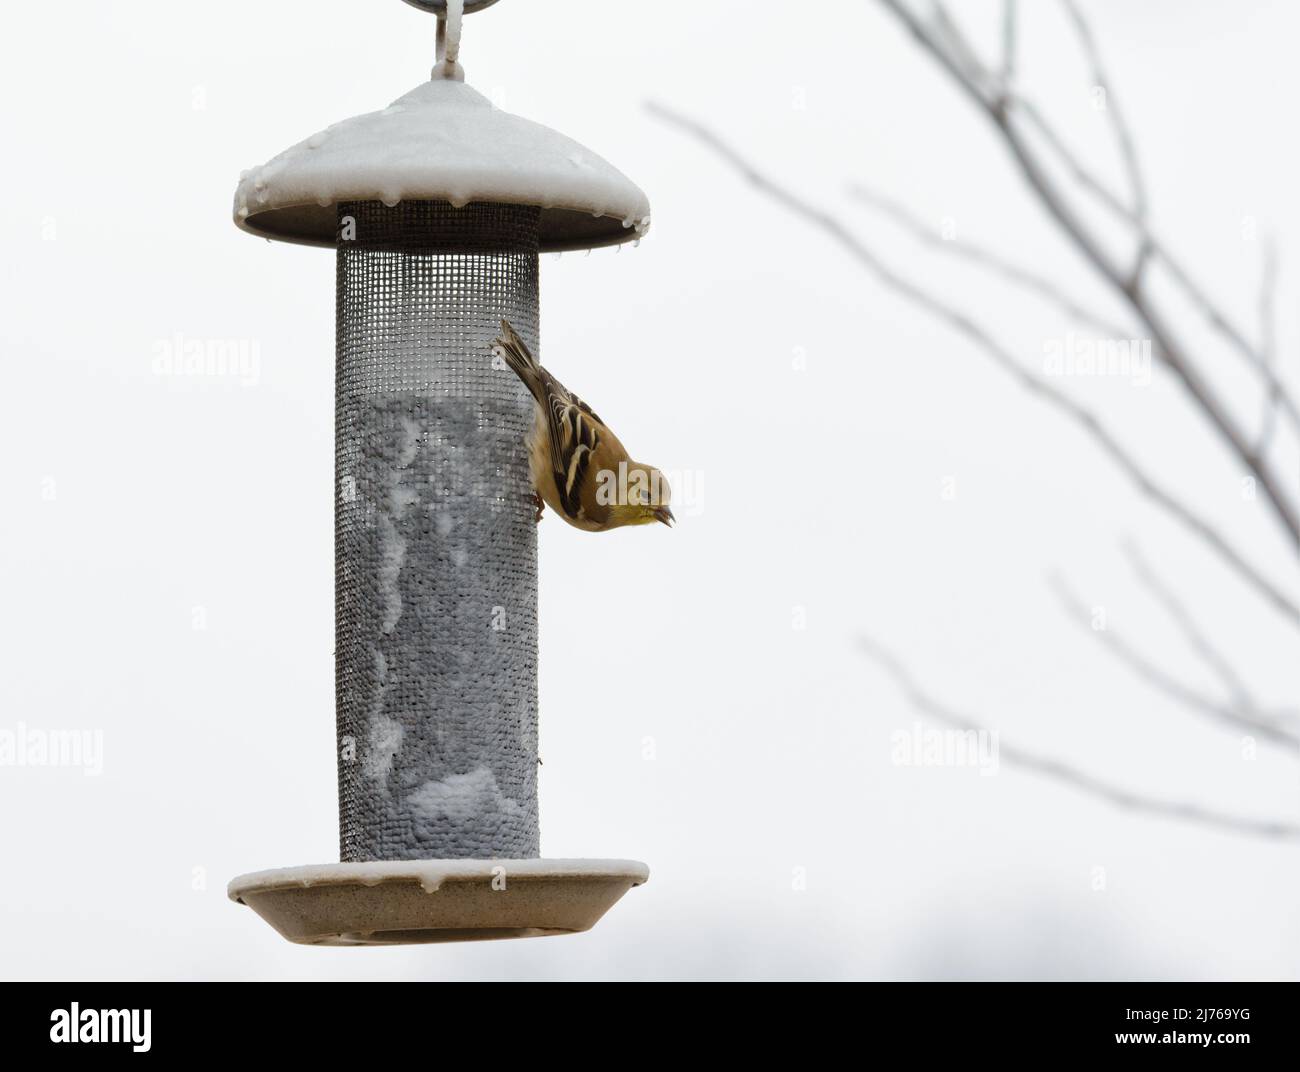 American Gold Finch hanging onto an ice covered mesh feeder after freezing rain, trying to extract seeds from it Stock Photo